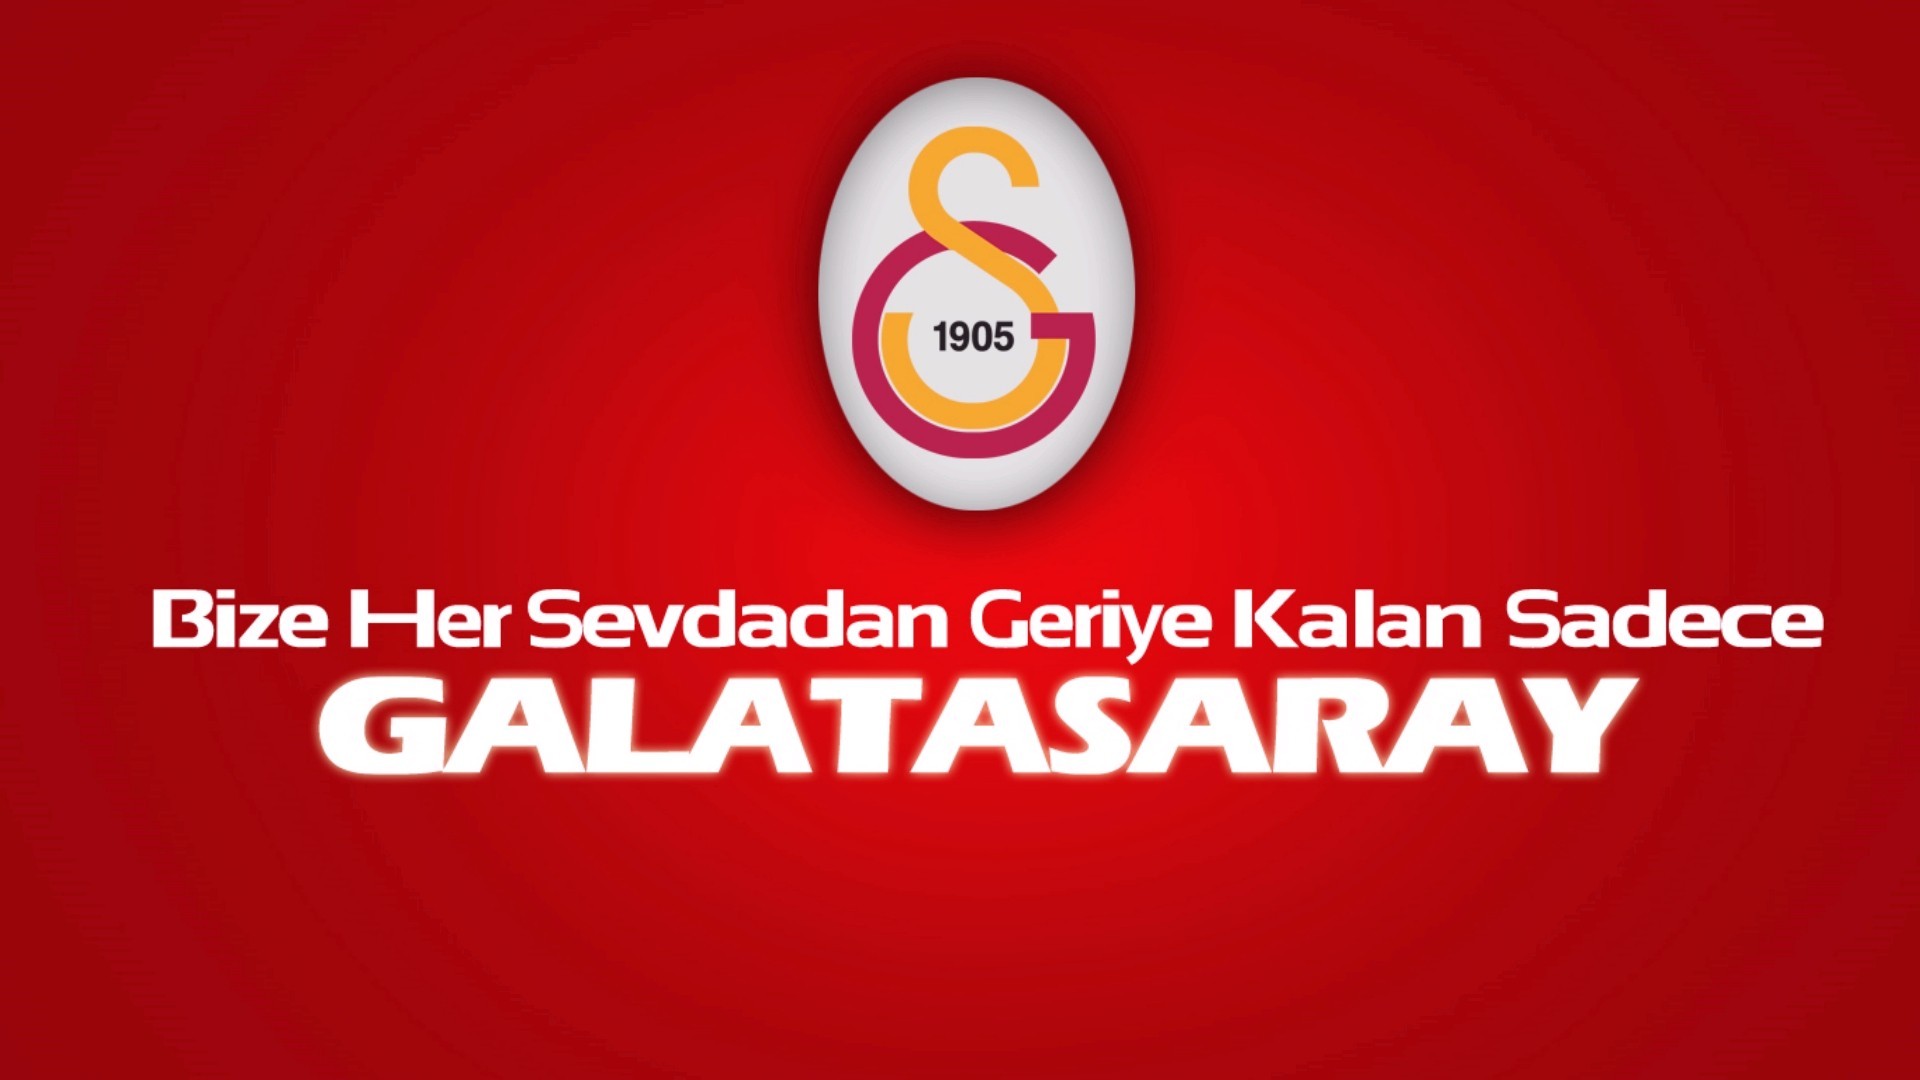 Wallpapers text logo Galatasaray S K on the desktop